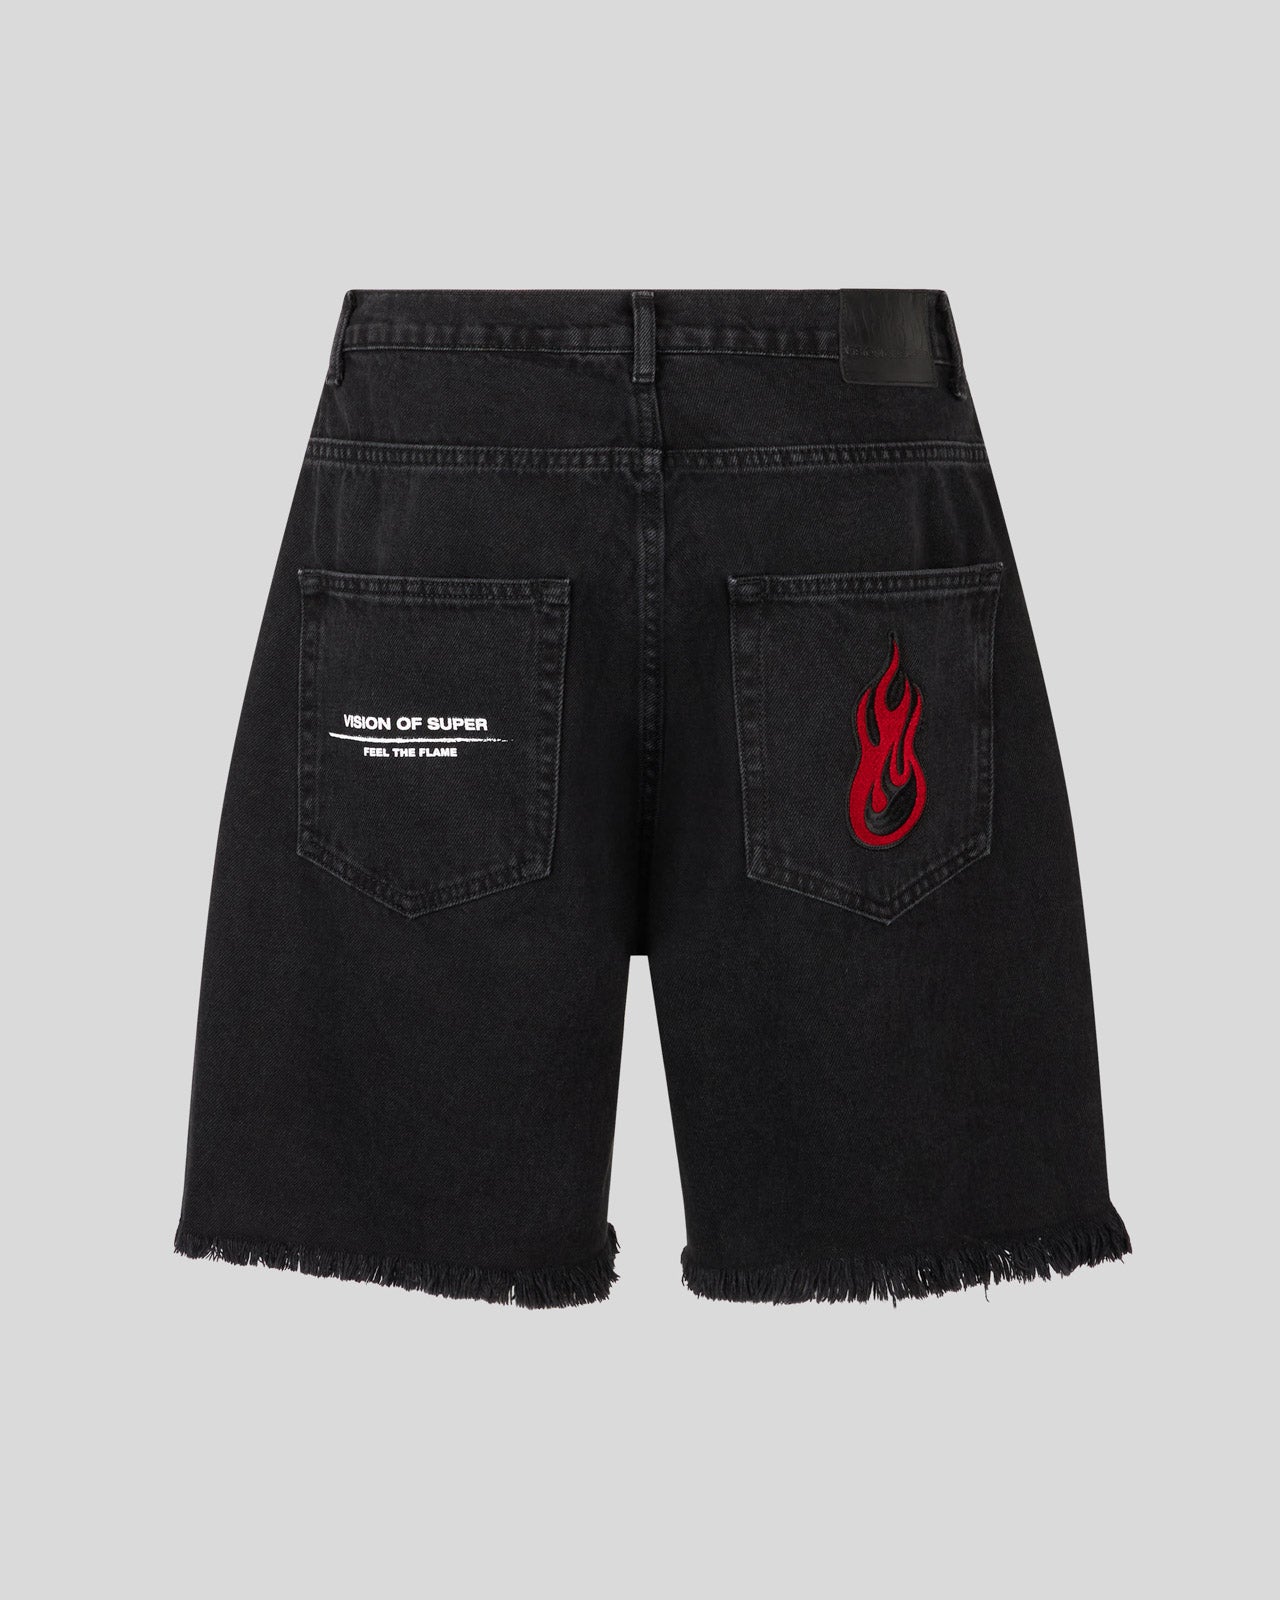 BLACK DENIM SHORTS WITH PRINTED LOGO AND FLAMES PATCH